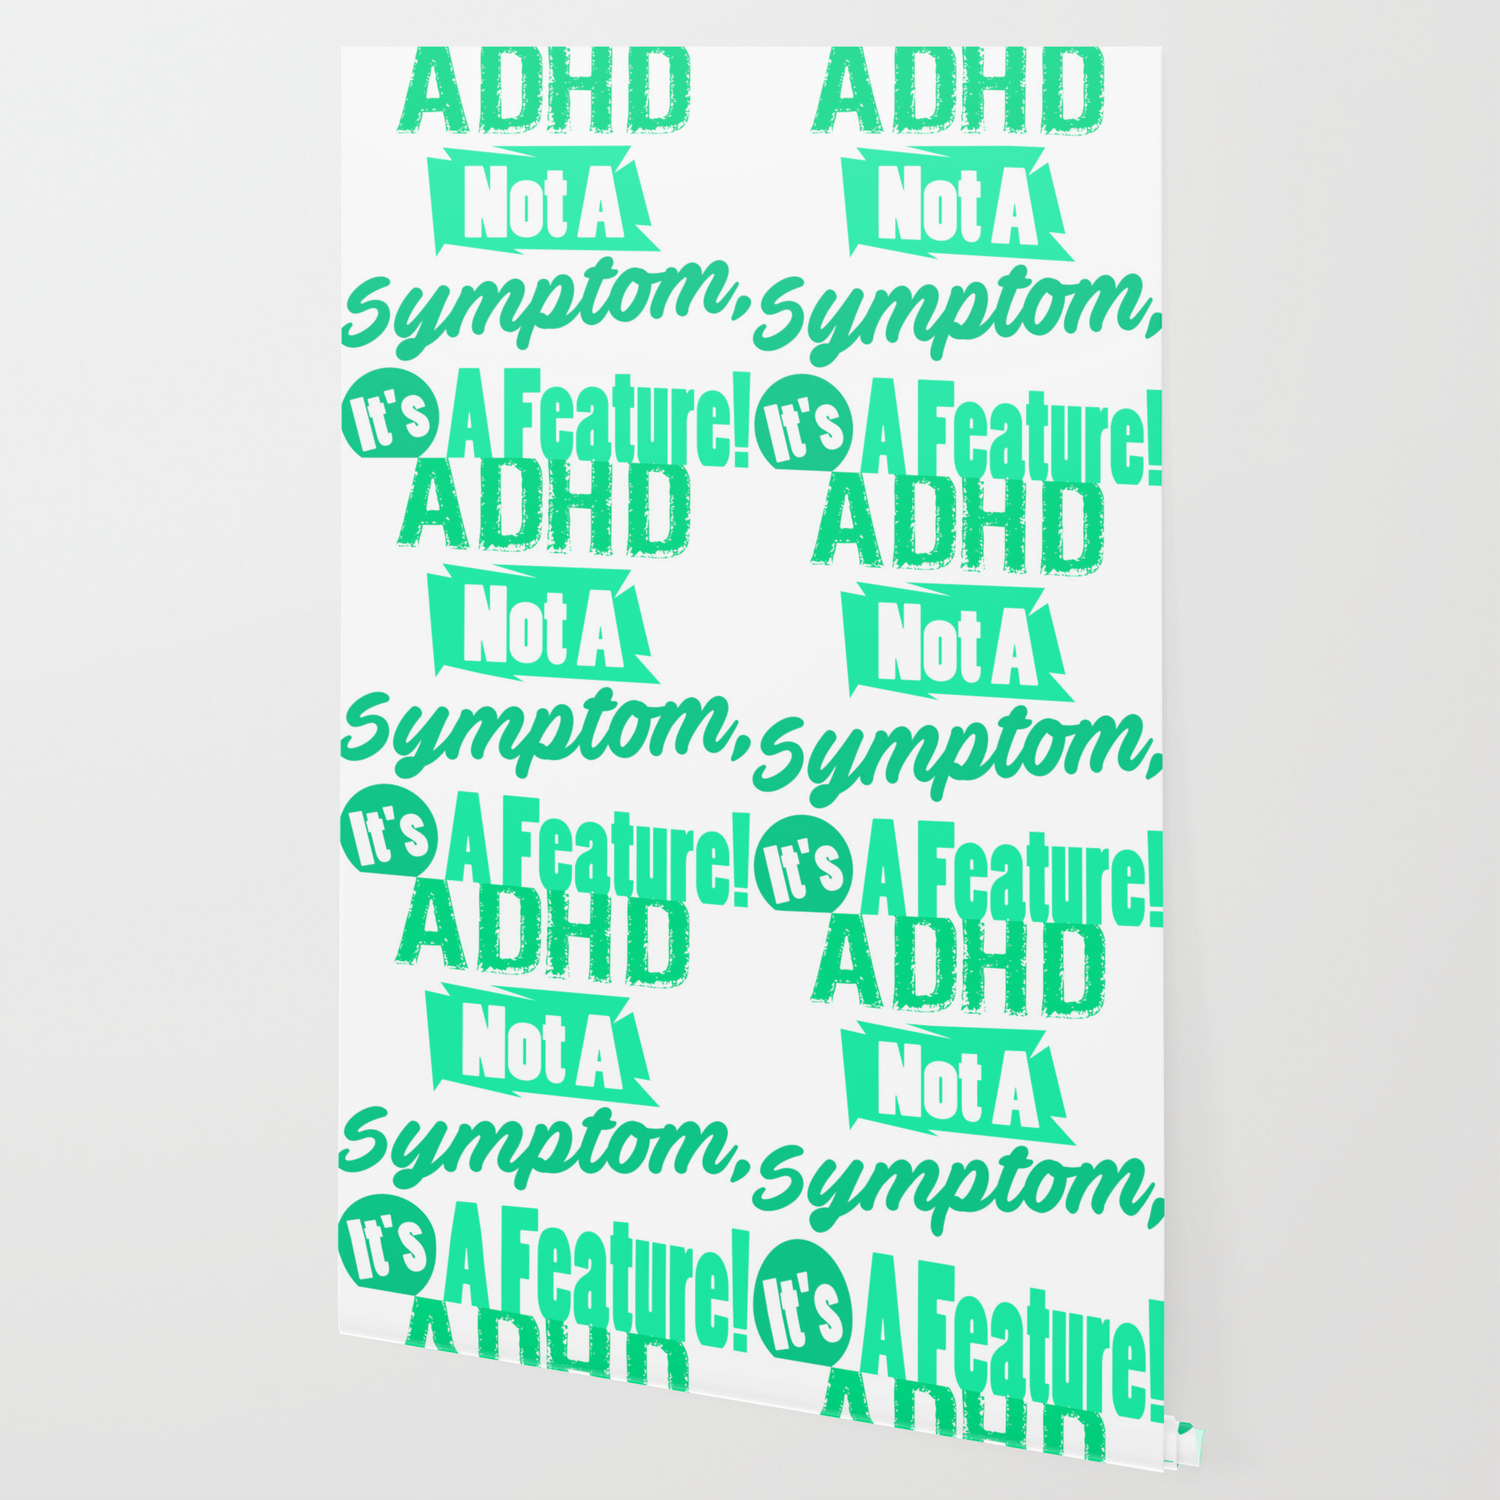 Adhd Wallpapers